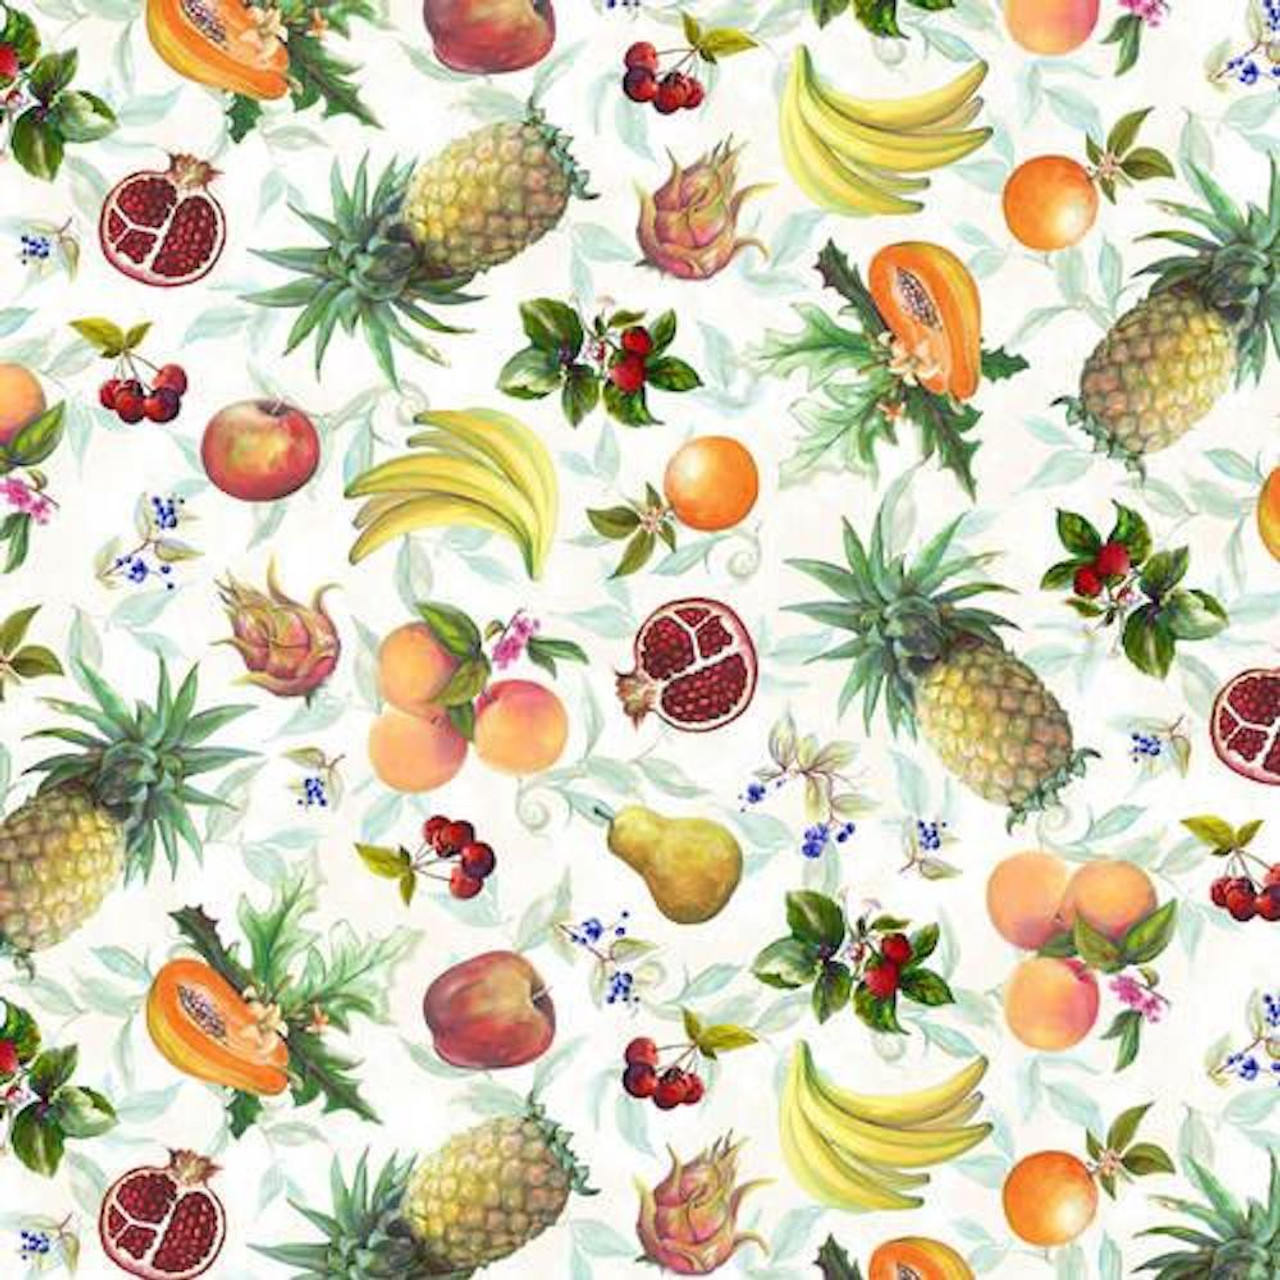 Blank Quilting Fruit For Thought Lg Fruit White Cotton Fabric By The Yard